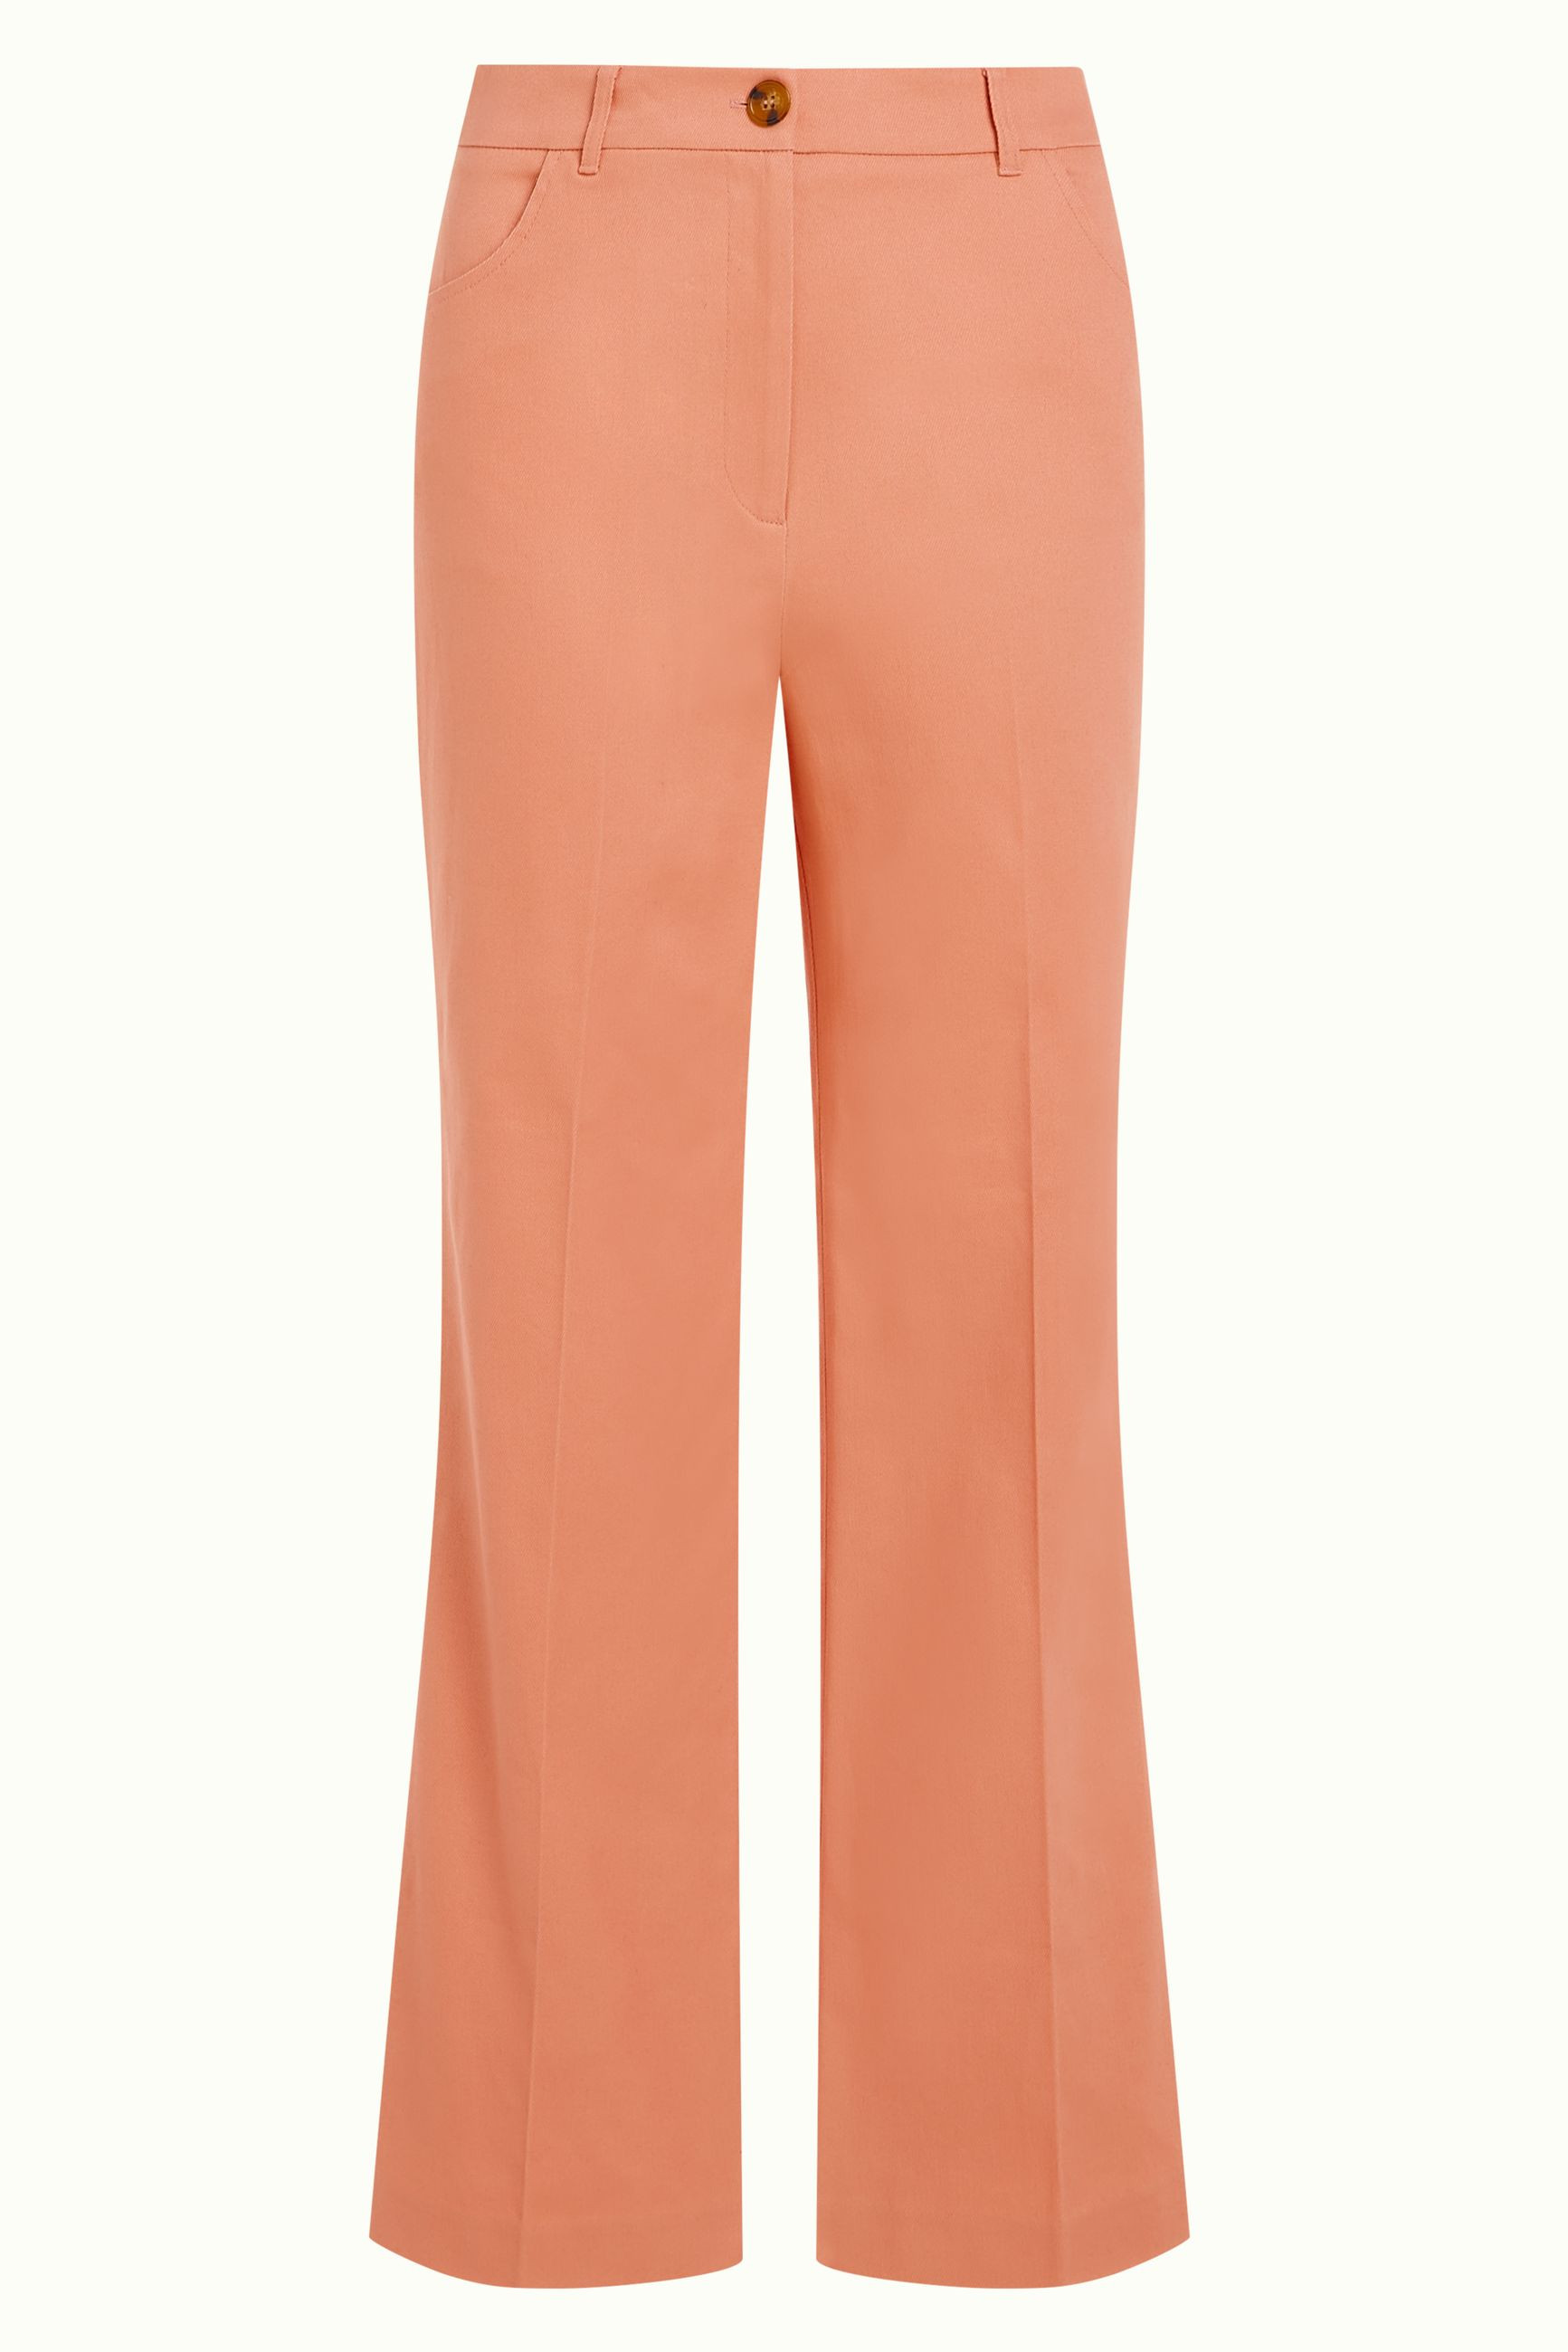 King Louie Hose  Marcie Pants Sturdy,  Farbe: Muted Pink